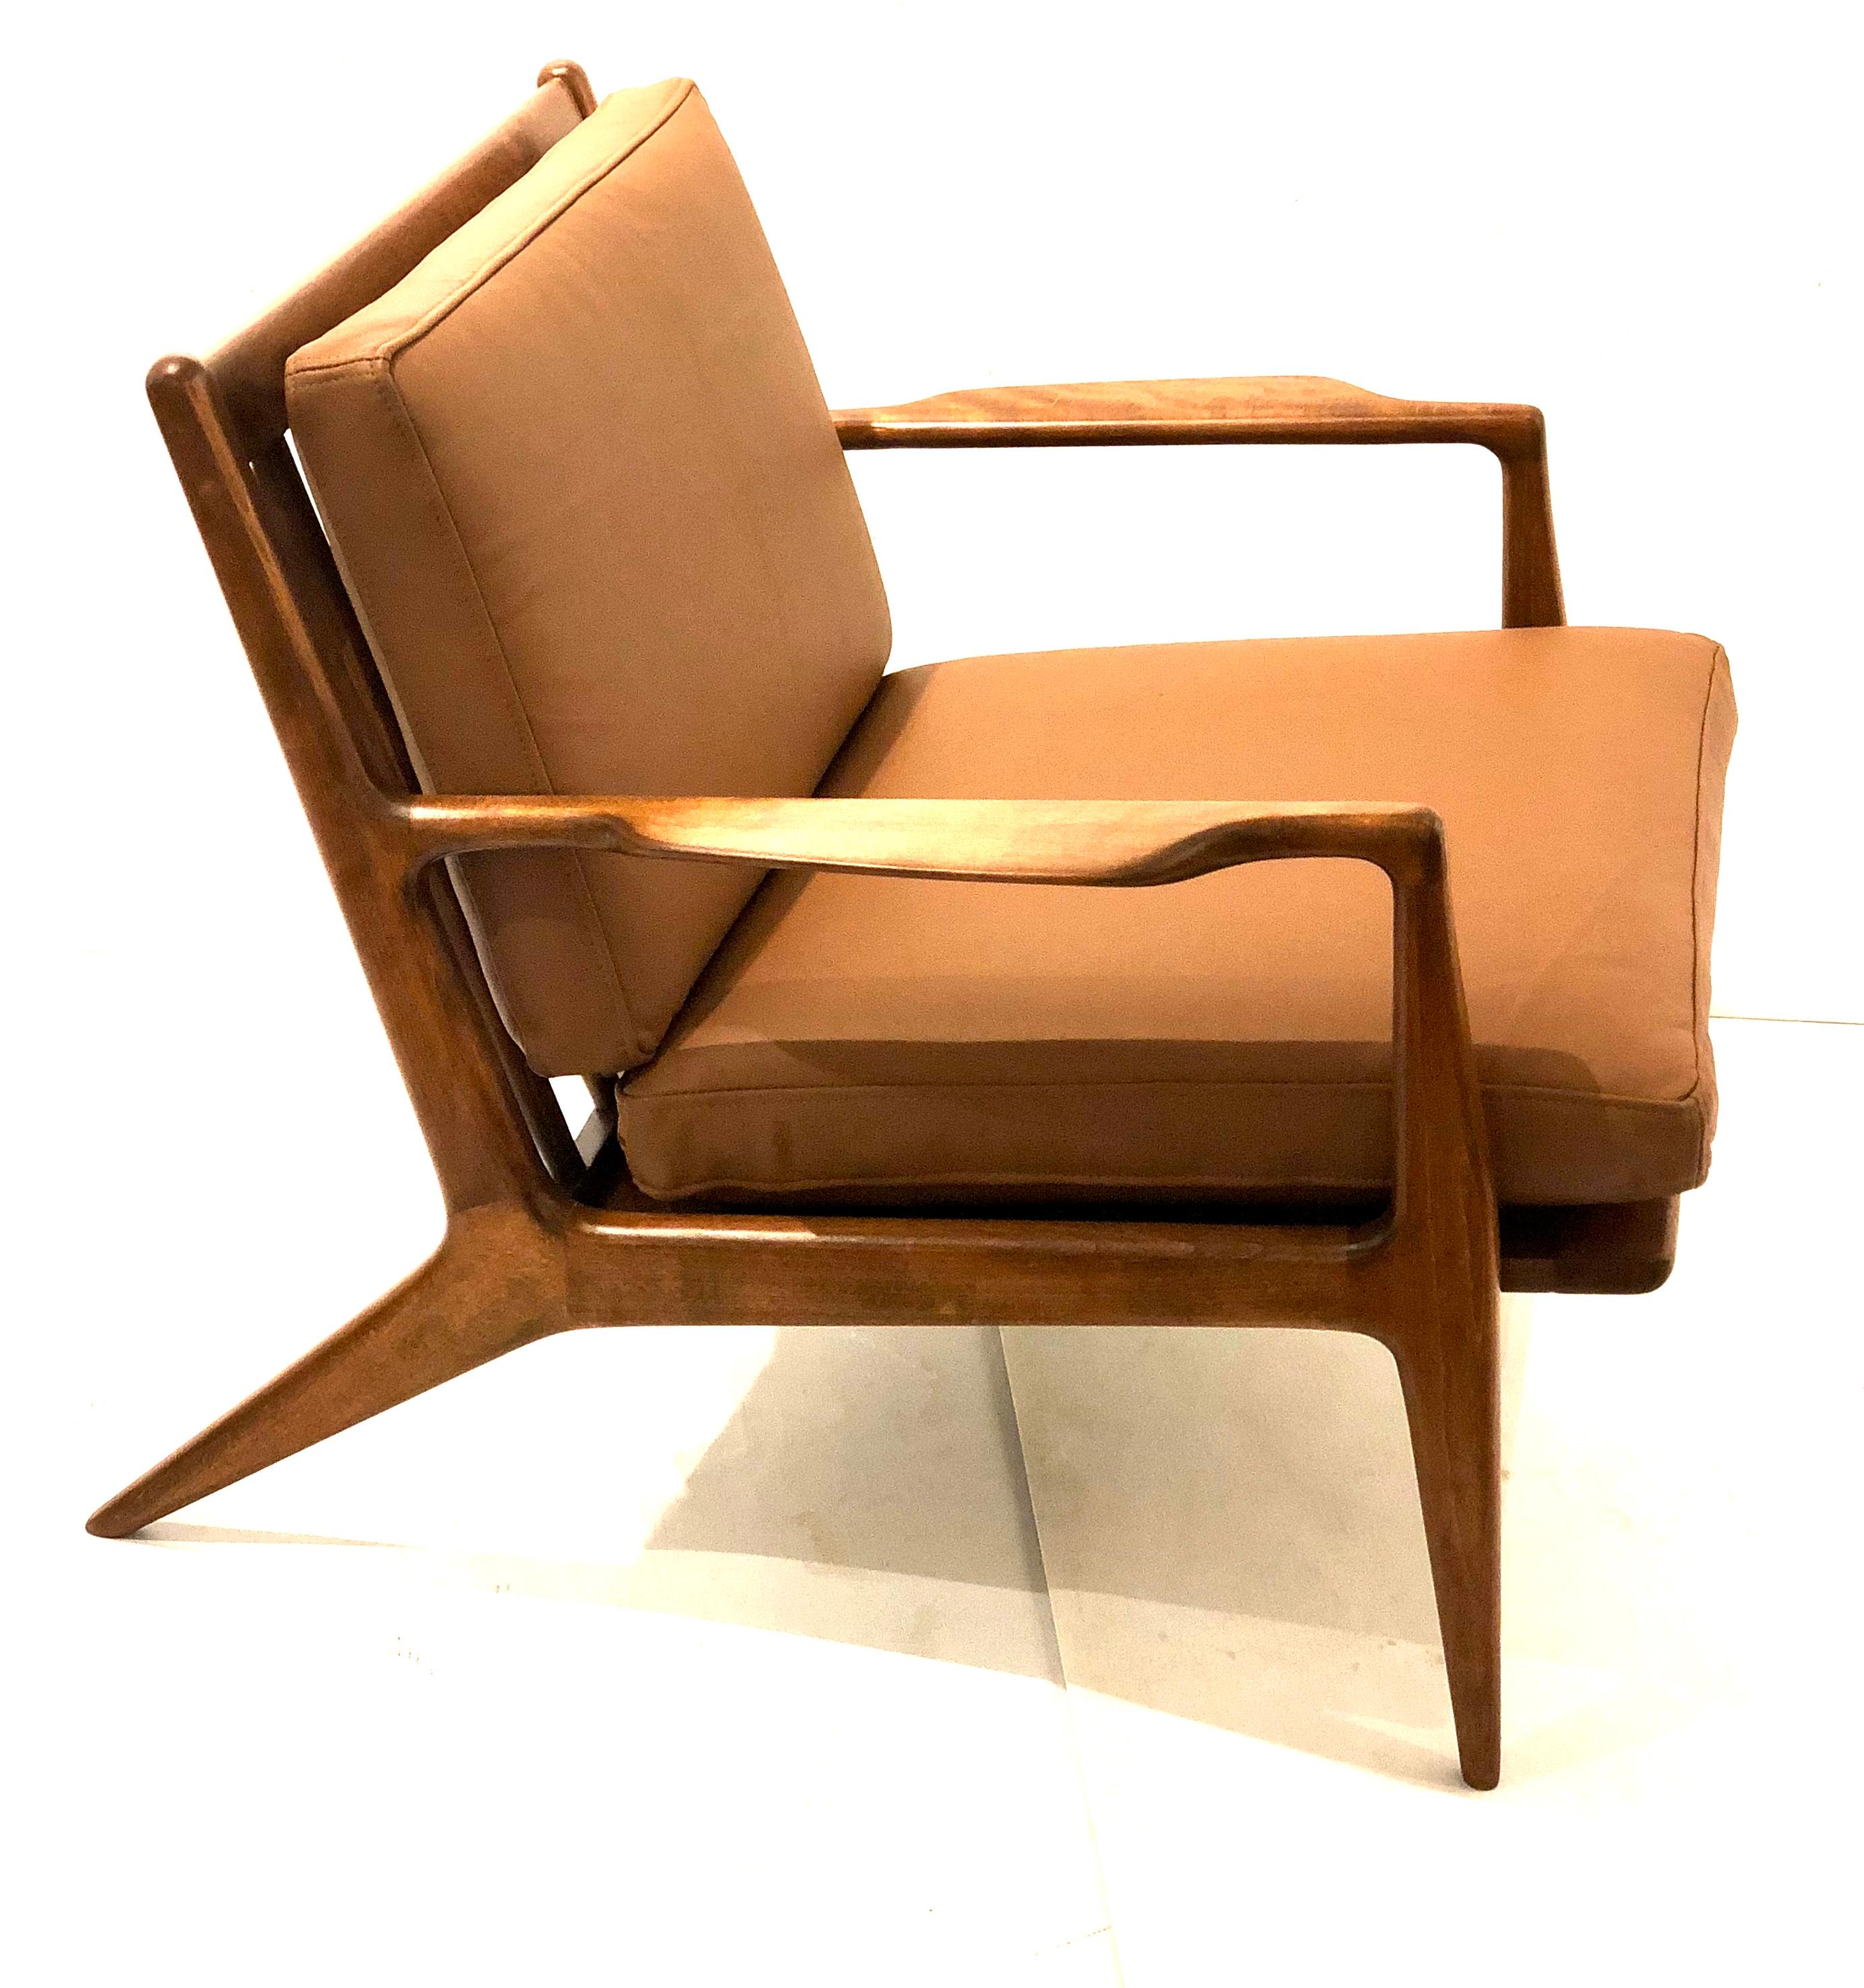 Beautiful pair of elegant chairs designed by Ib Kofod-Larsen for Selig, circa 1950s made in Denmark , freshly refinished in walnut finish and leather cushions new straps ,solid and sturdy very good looking chairs nice sculpted arms with its original